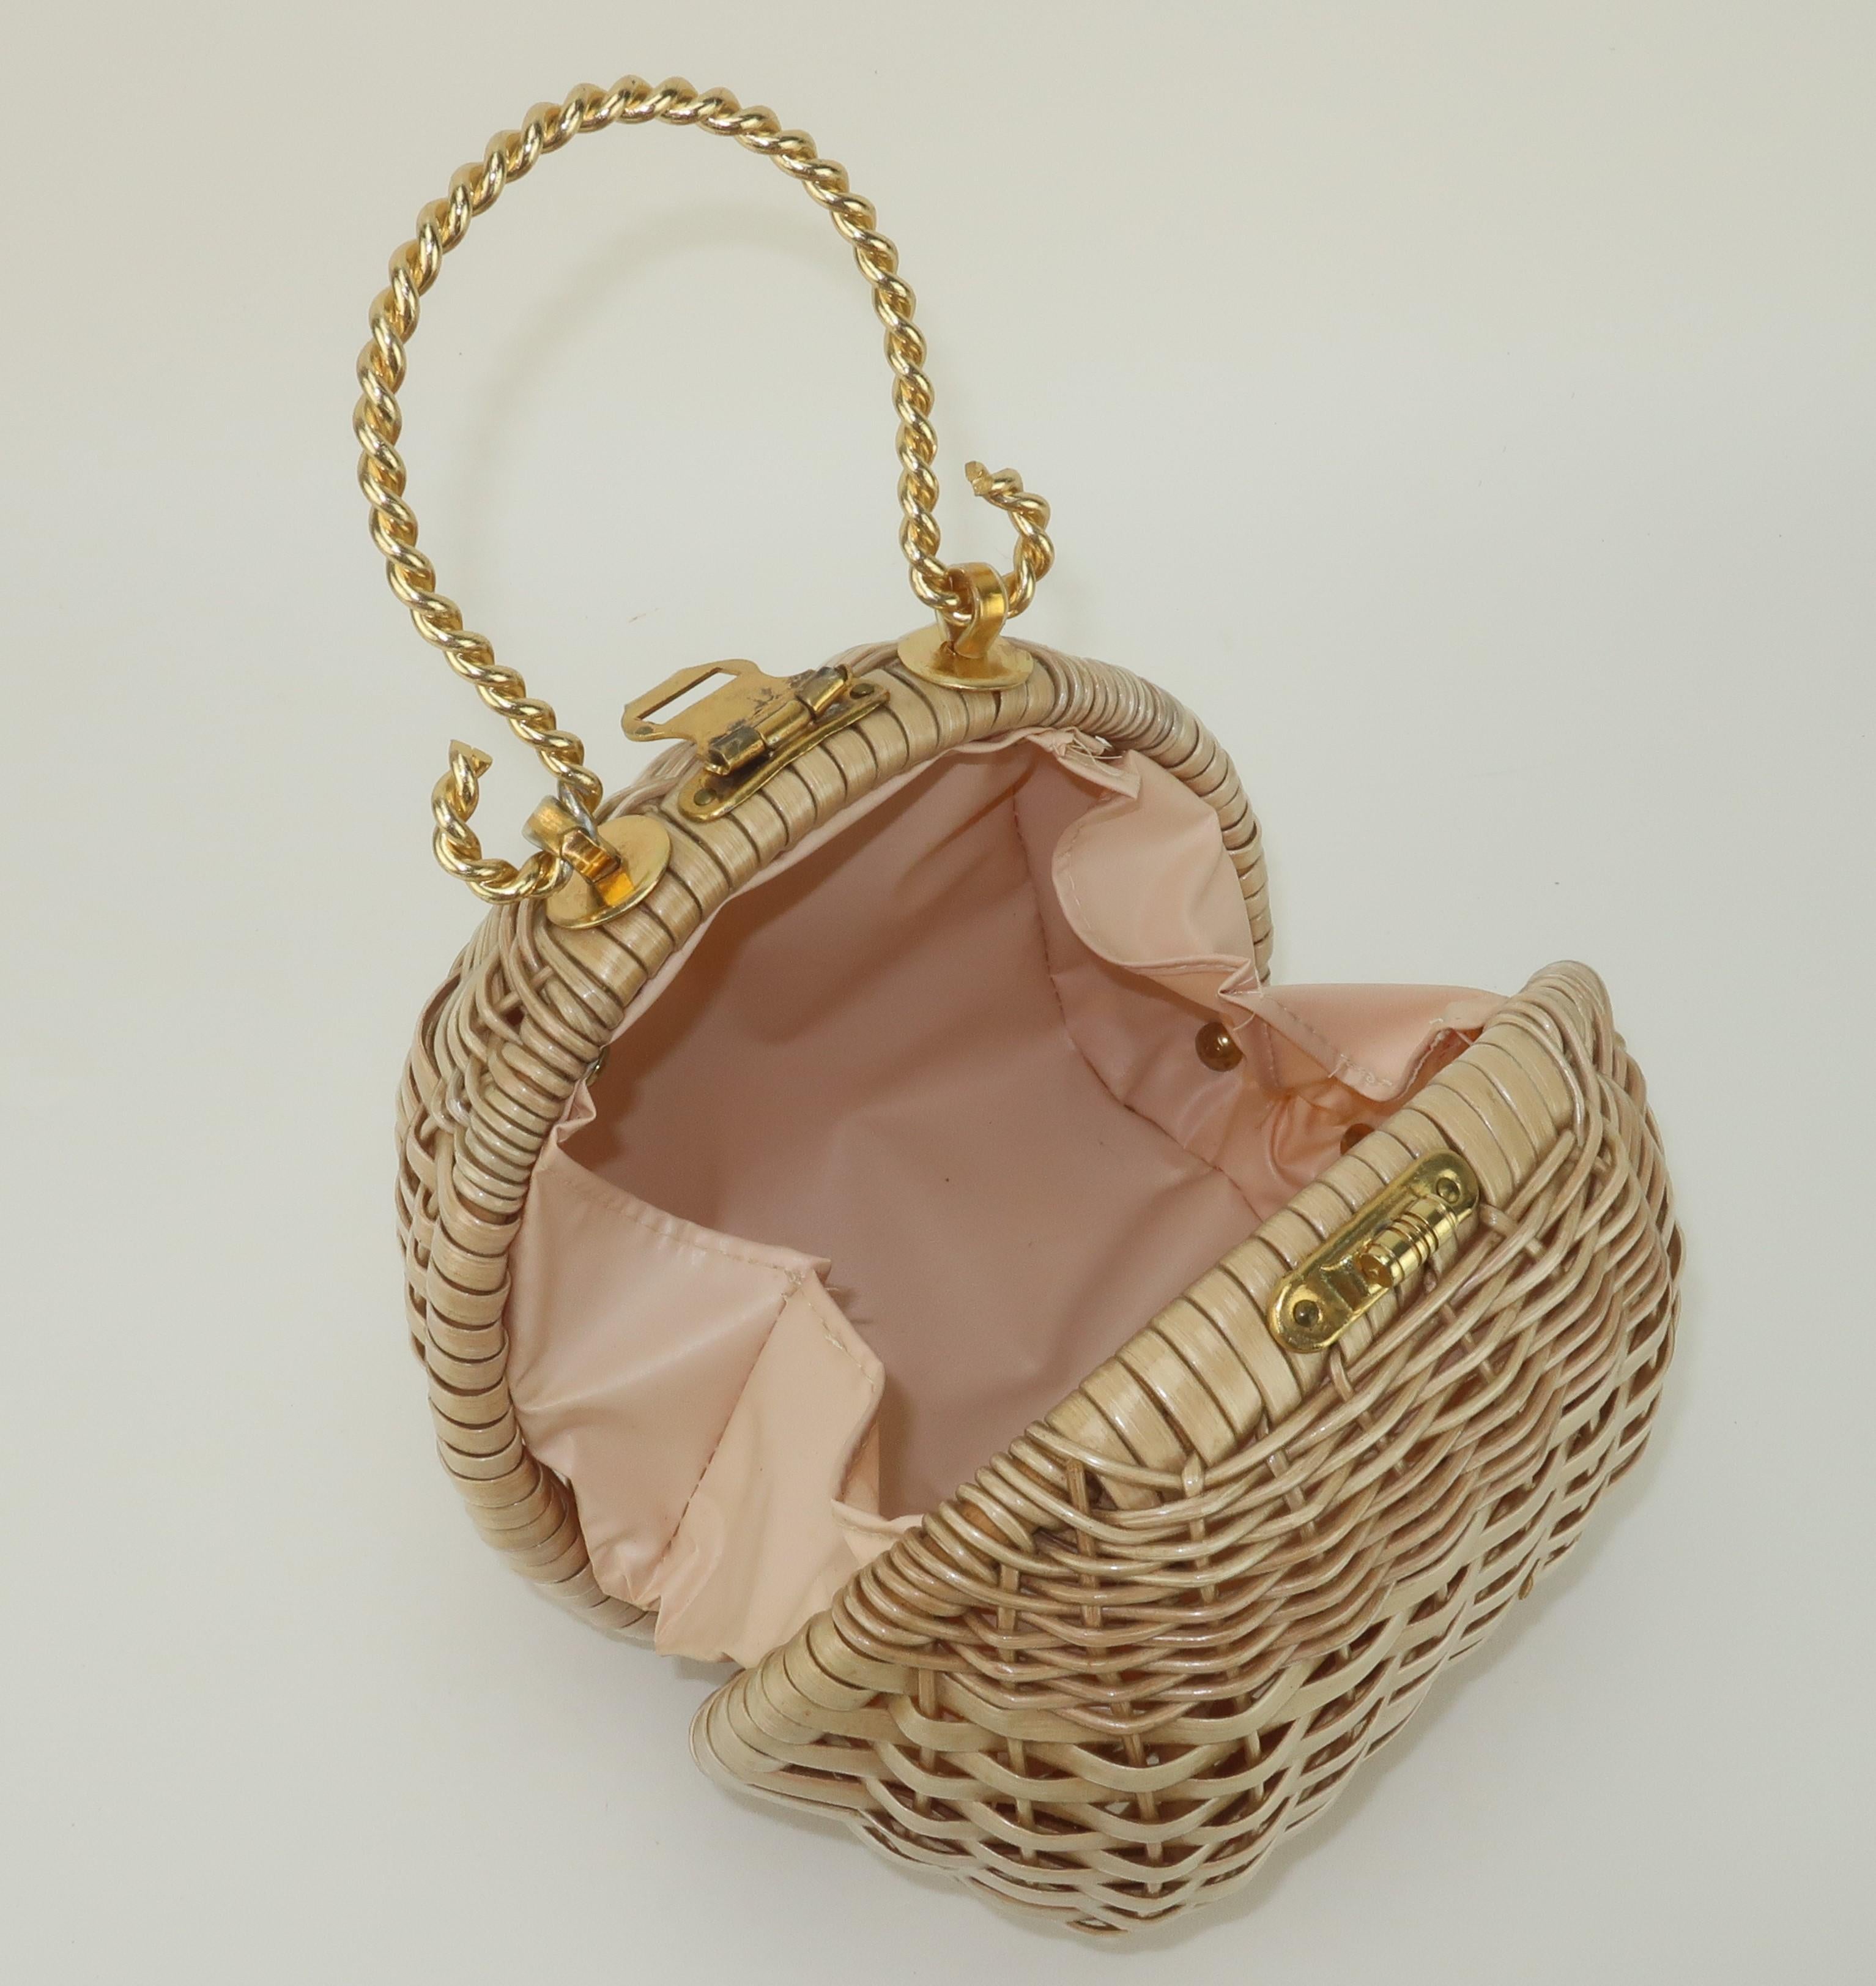 Wicker Ball Shaped Handbag With Gold Handle, 1960's For Sale 2